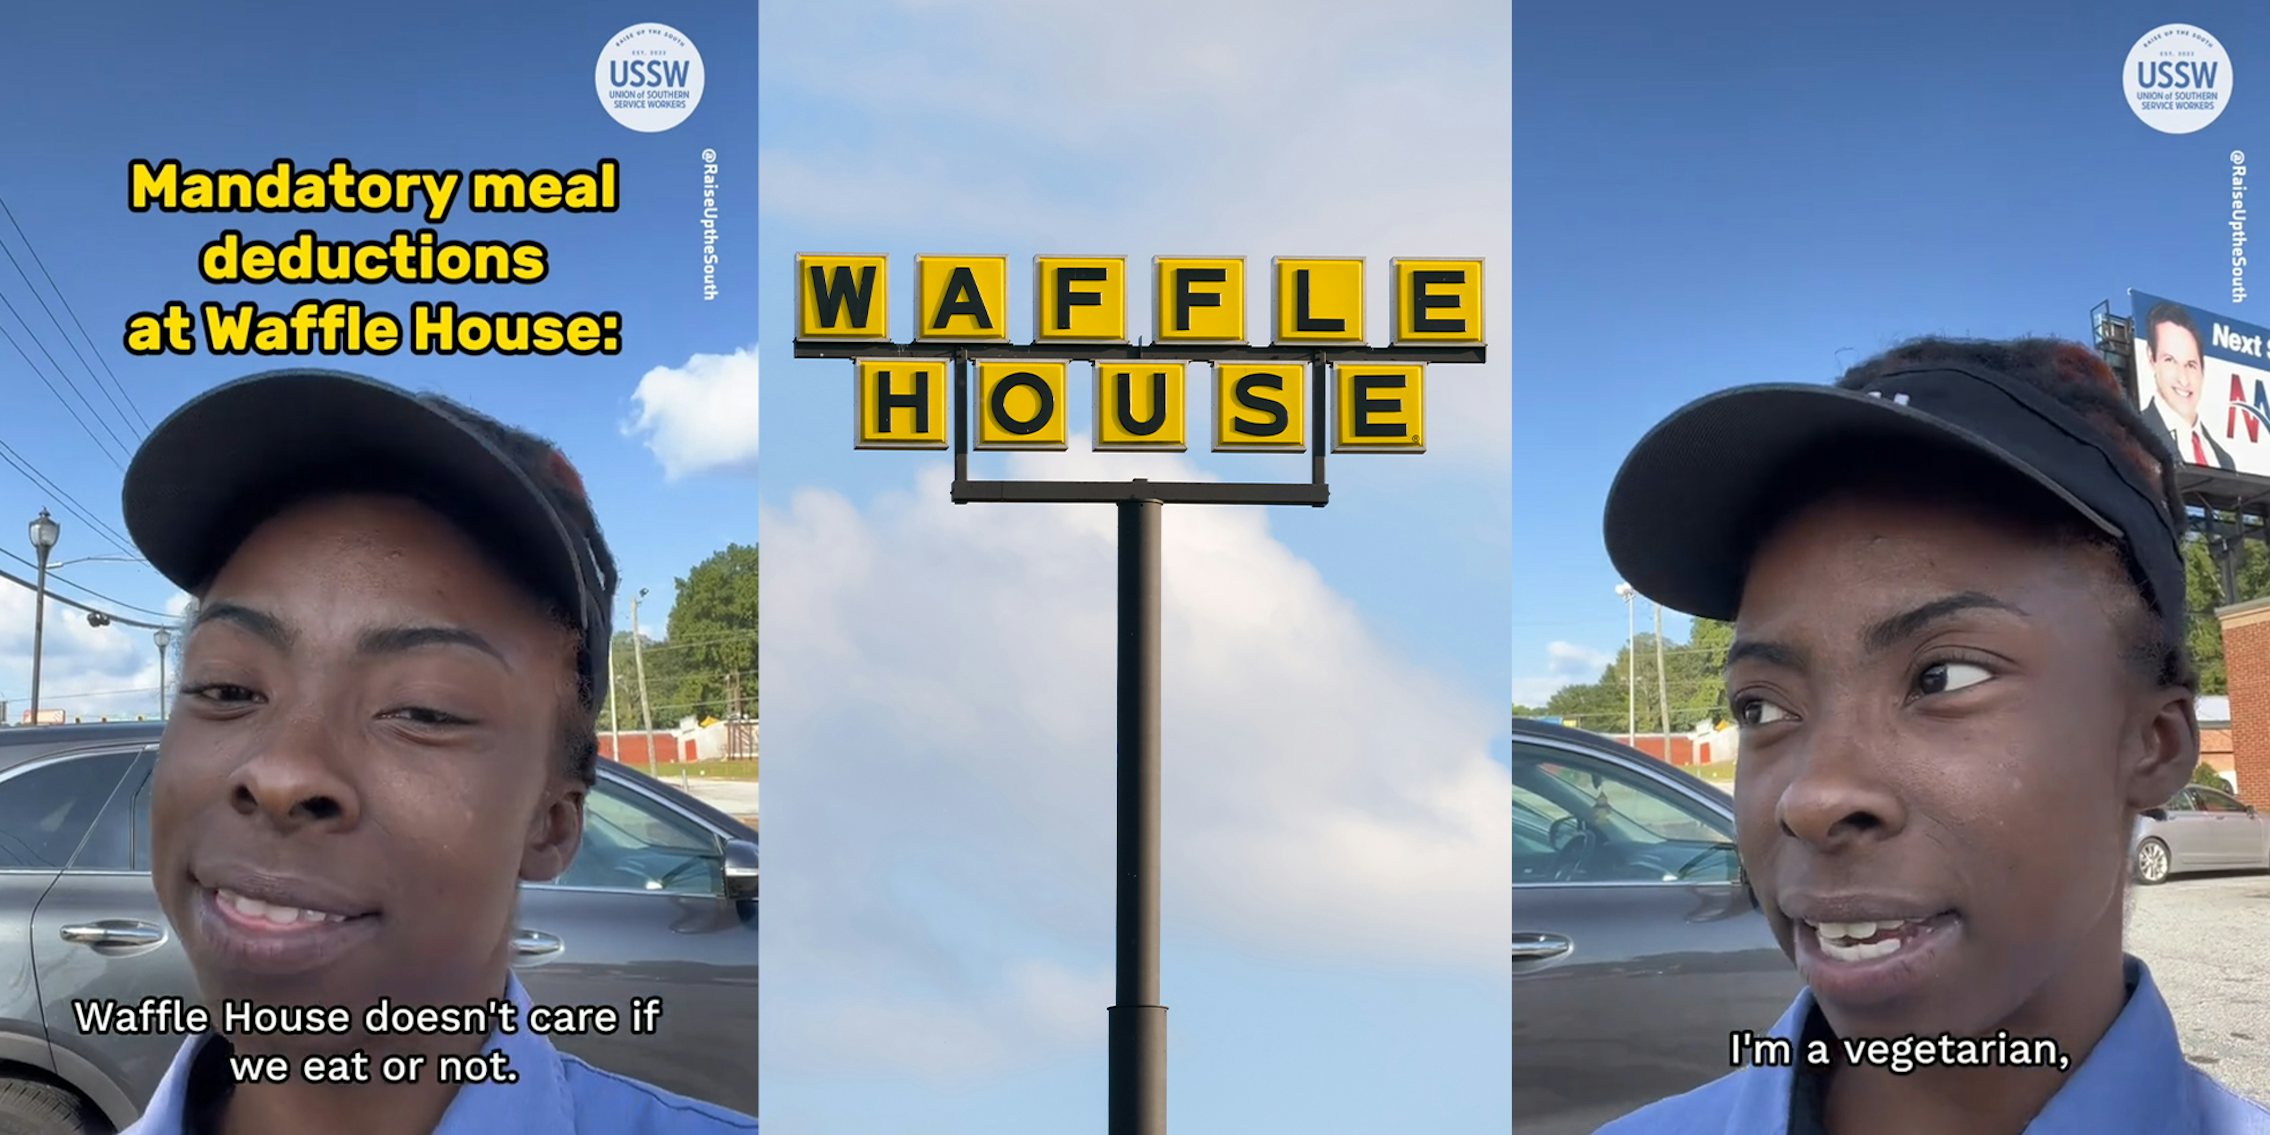 Waffle House worker says she’s vegetarian but still gets $3.15 from check taken out daily for ‘mandatory meal deductions’